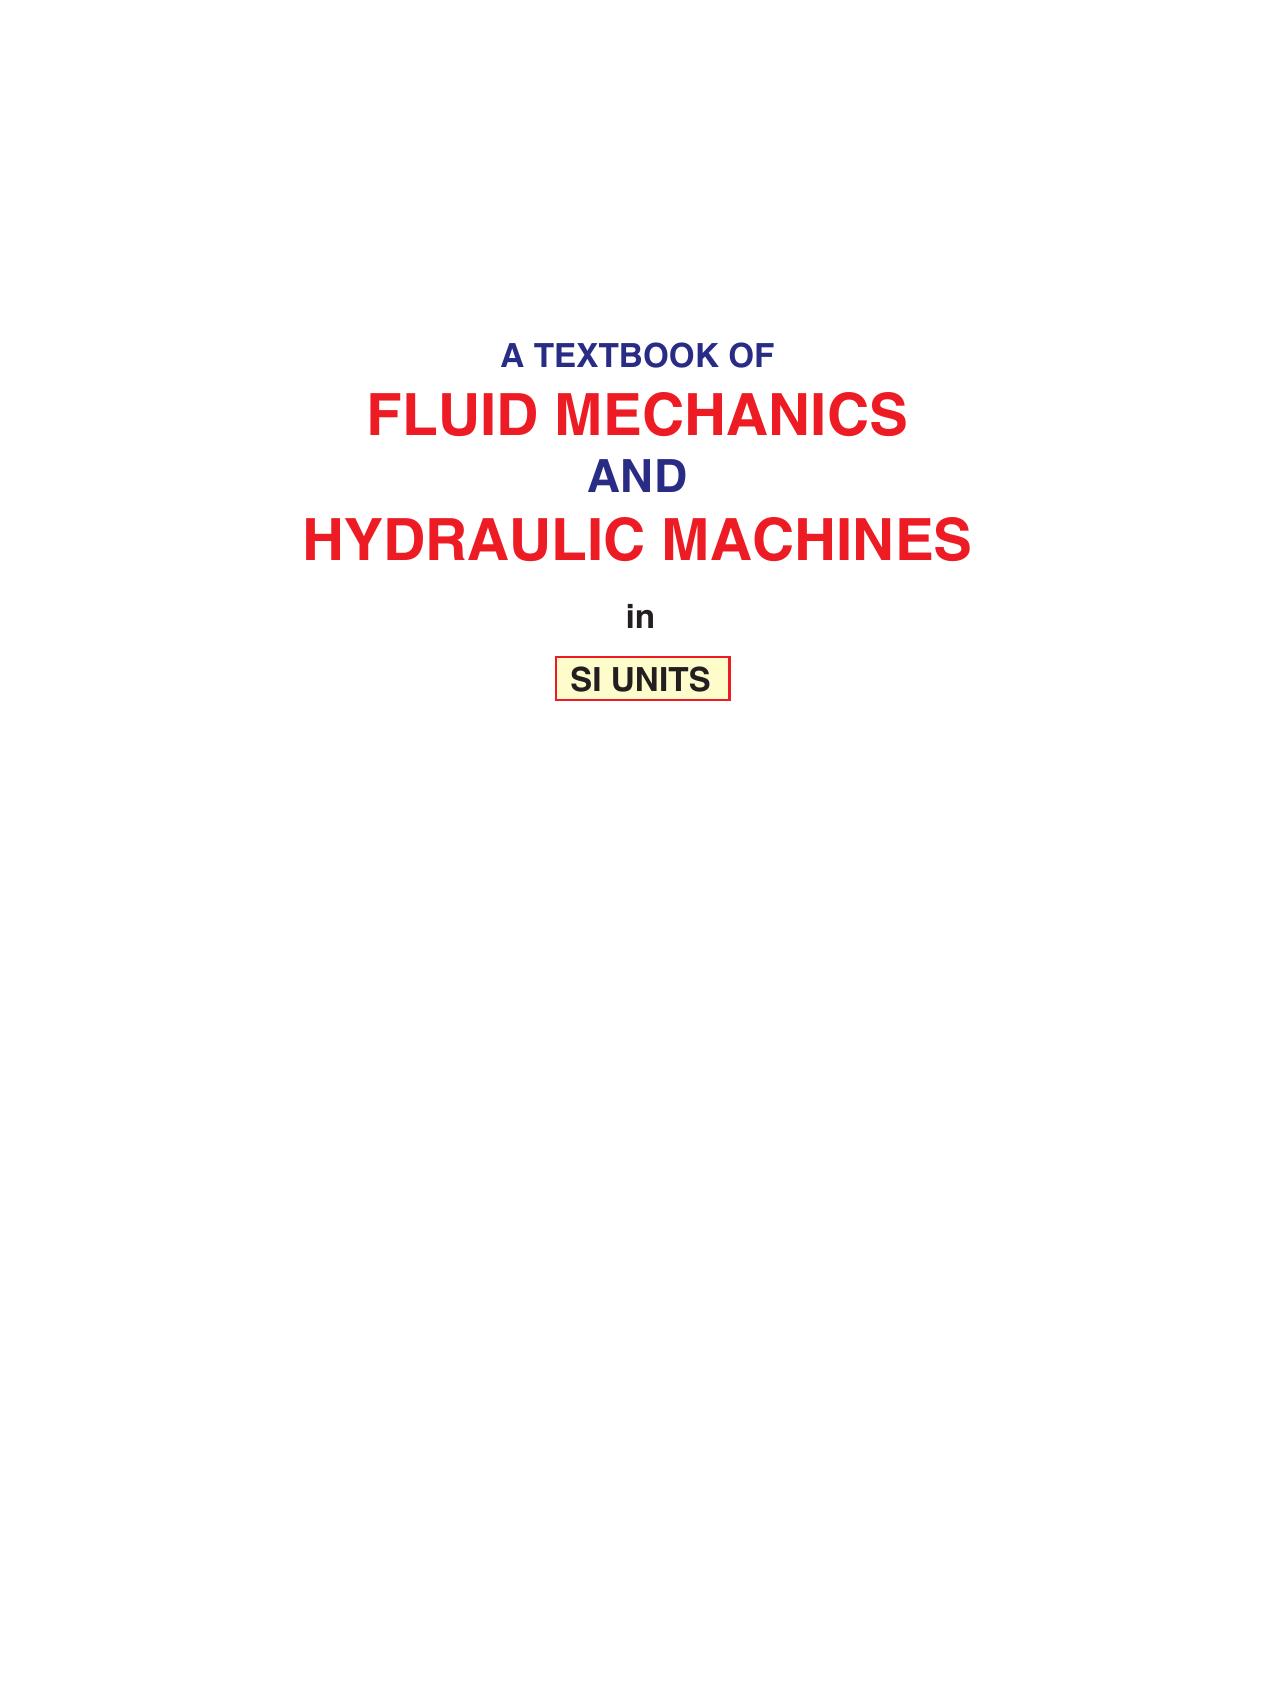 A Textbook of Fluid Mechanics and hydraulic machines                                                    2011